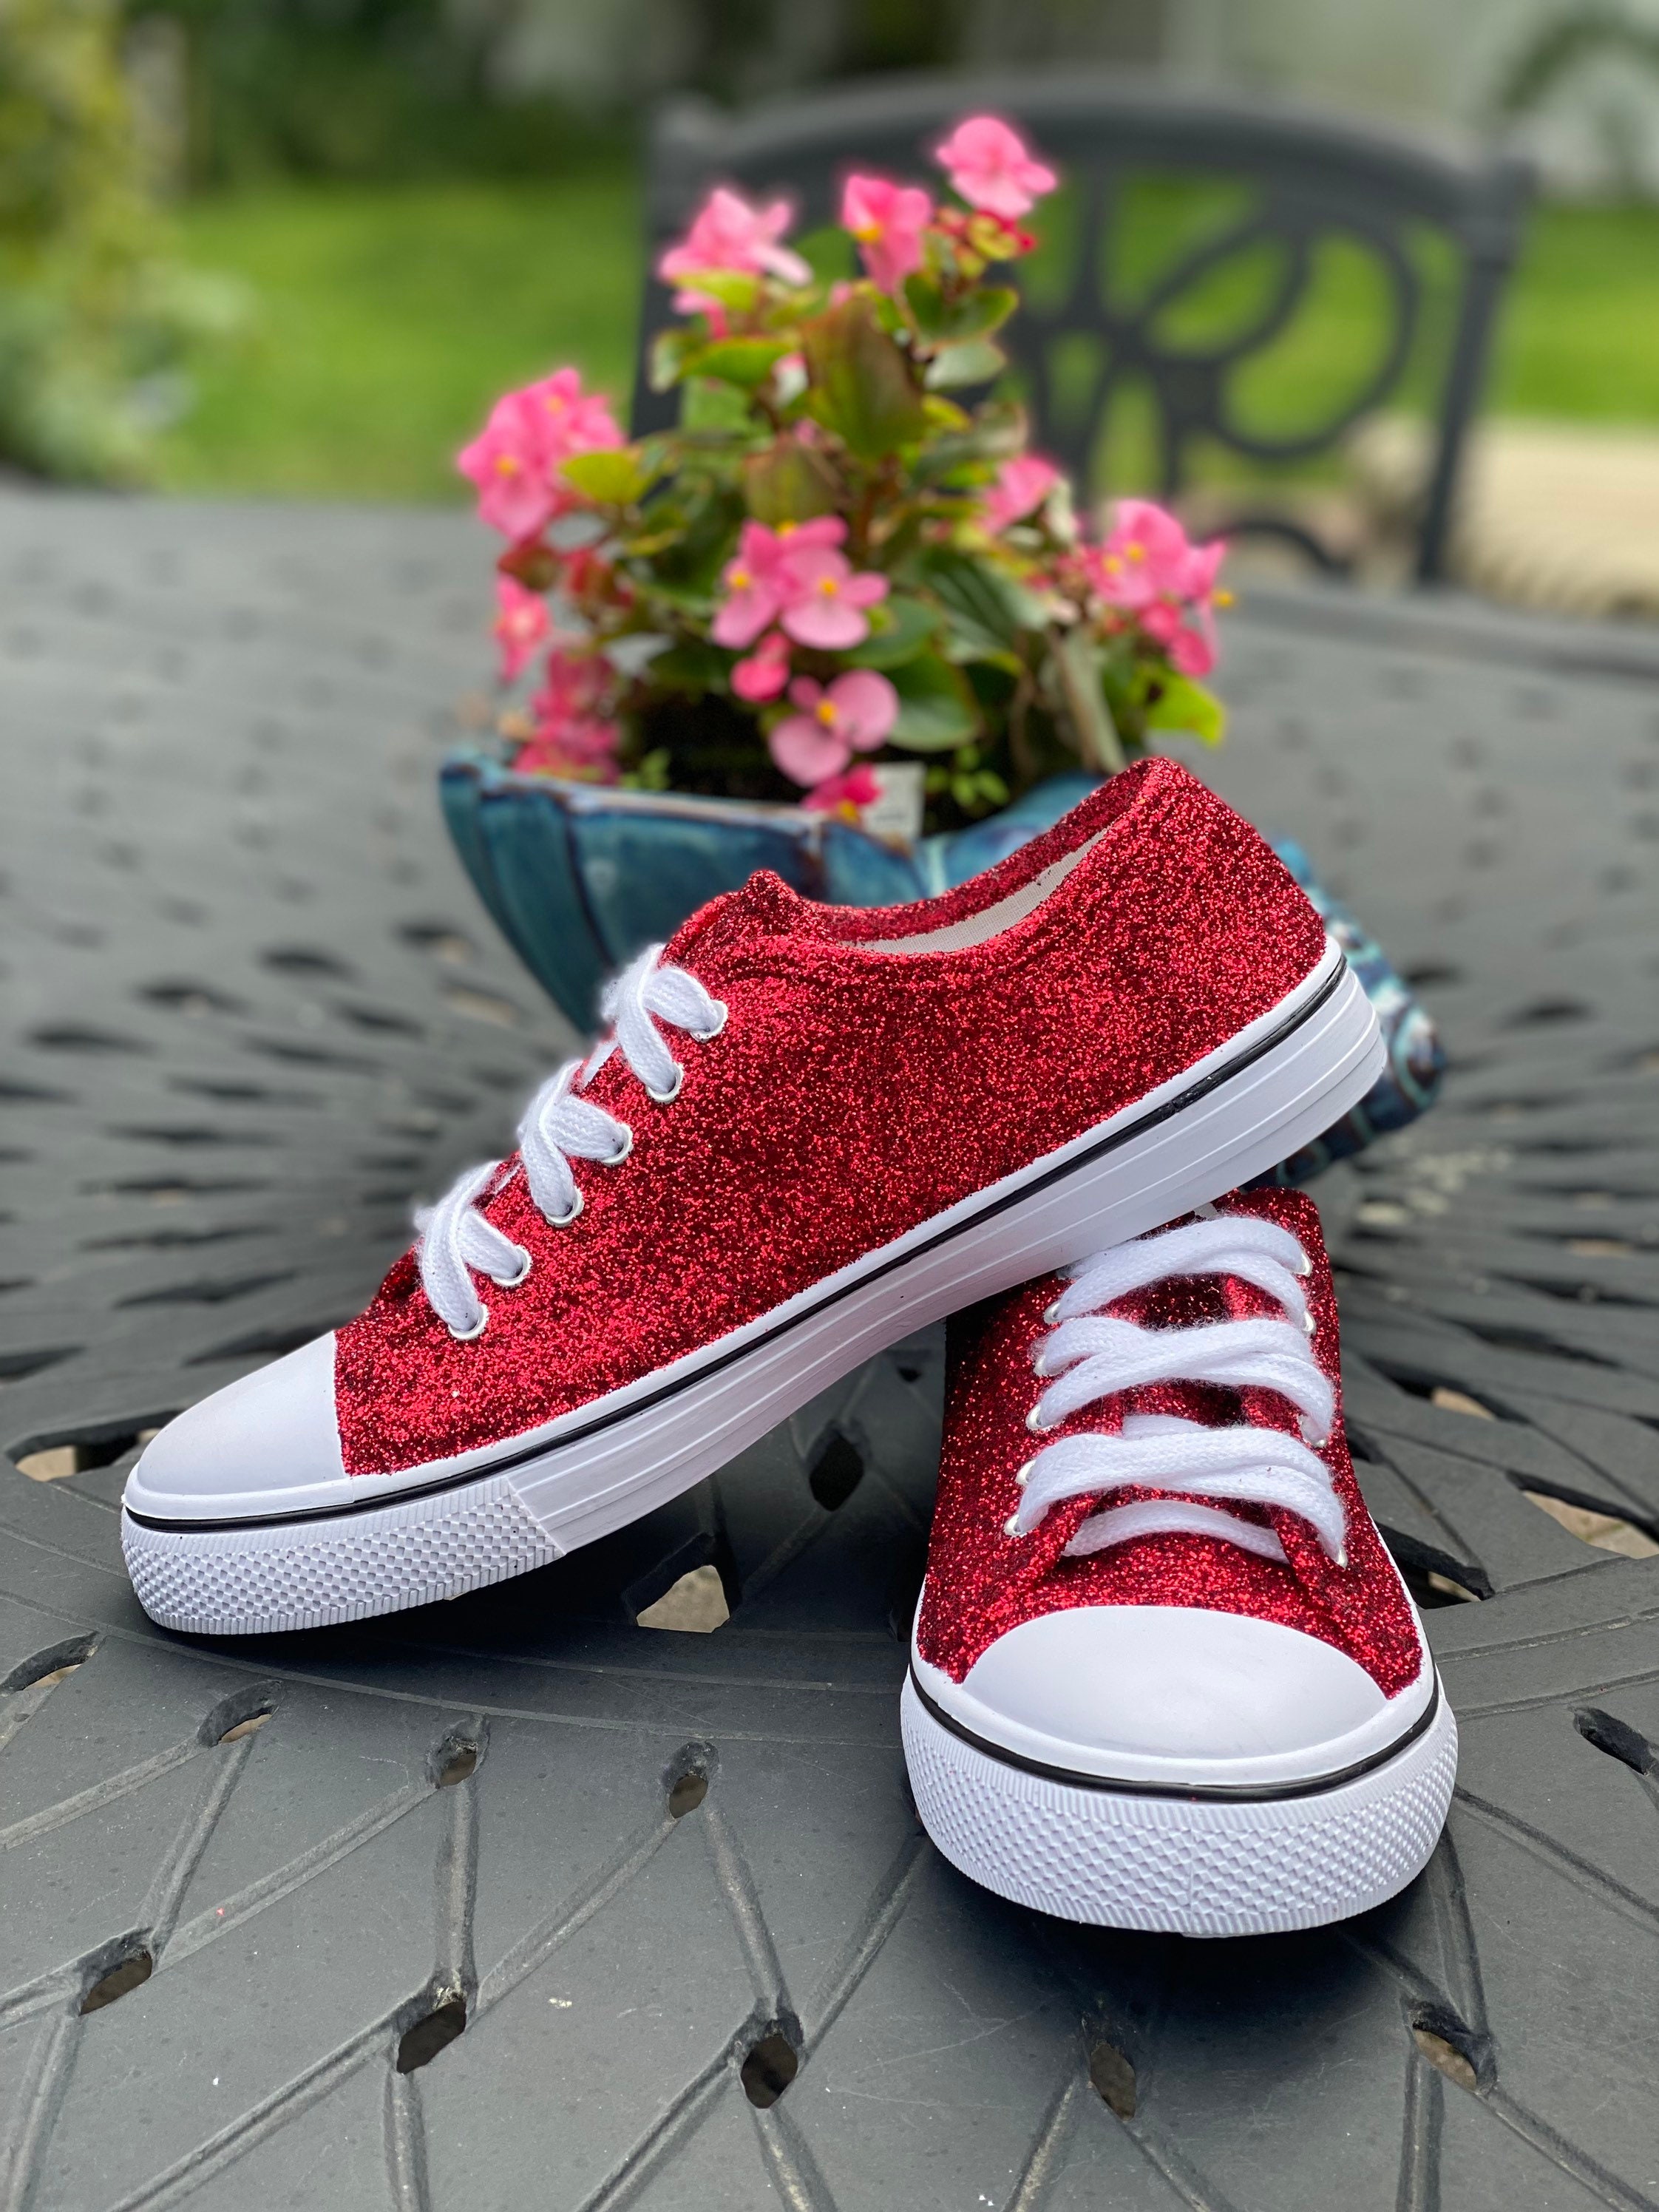 Silver Sequin Converse Trainers, White Sequin Converse Shoes for Bride, Sequin  Sneakers, Sequin Tennis Shoes for Prom or Party 